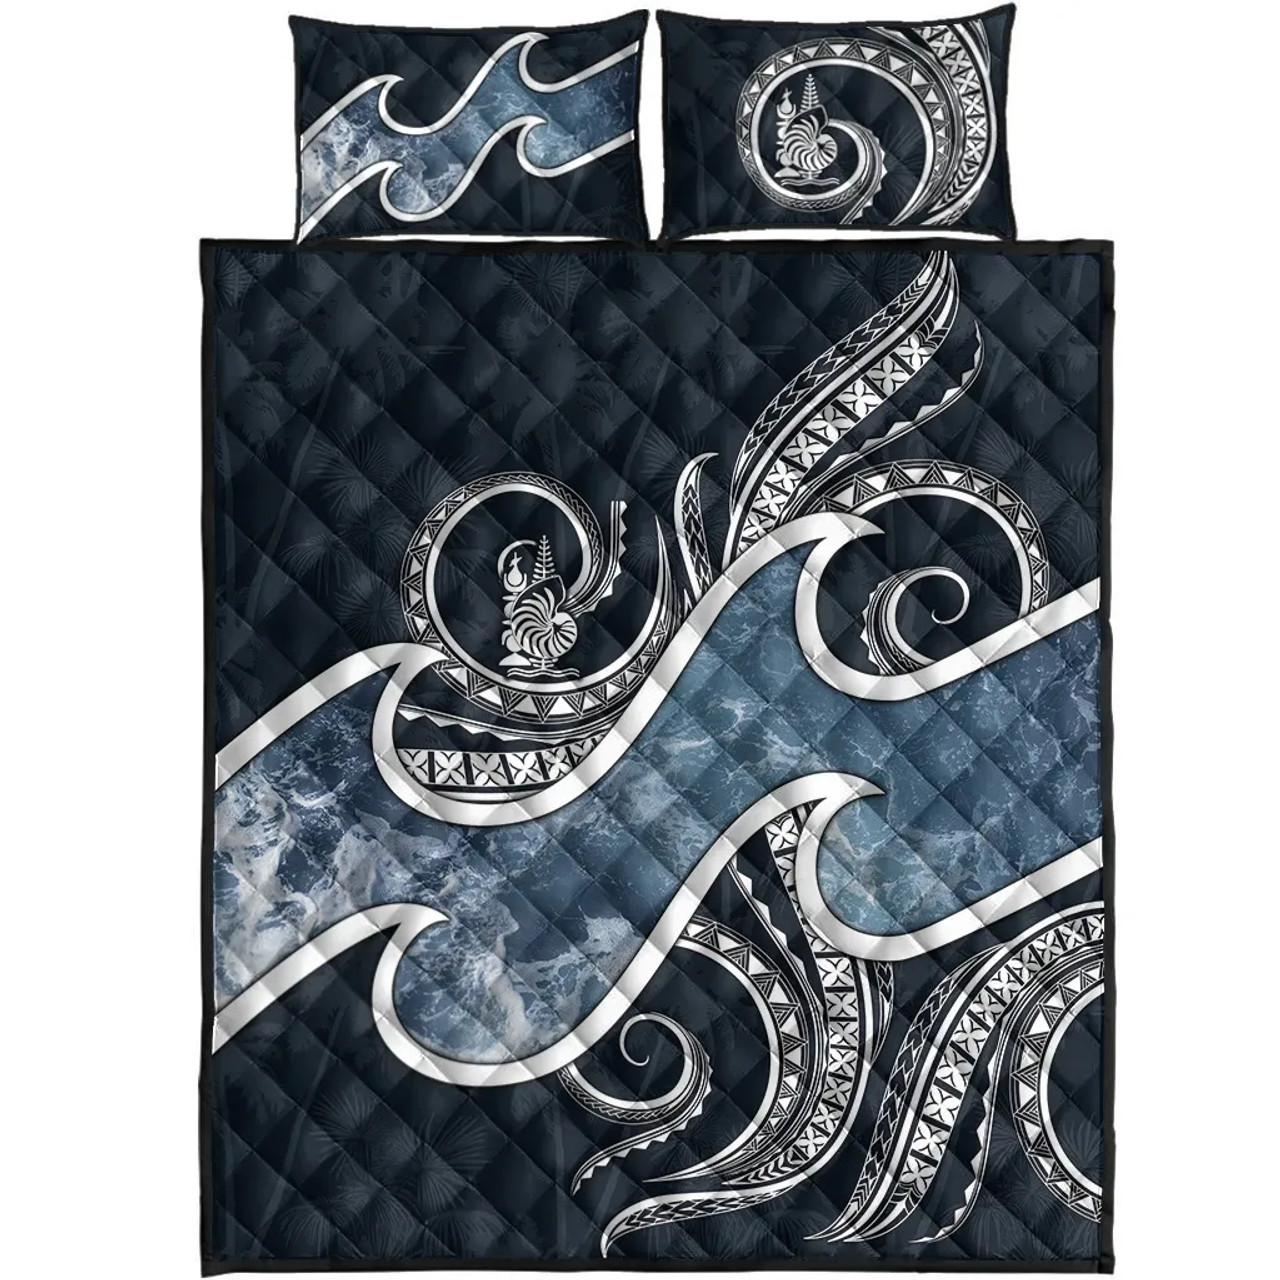 New Caledonia Polynesian Quilt Bed Set - Ocean Style 2